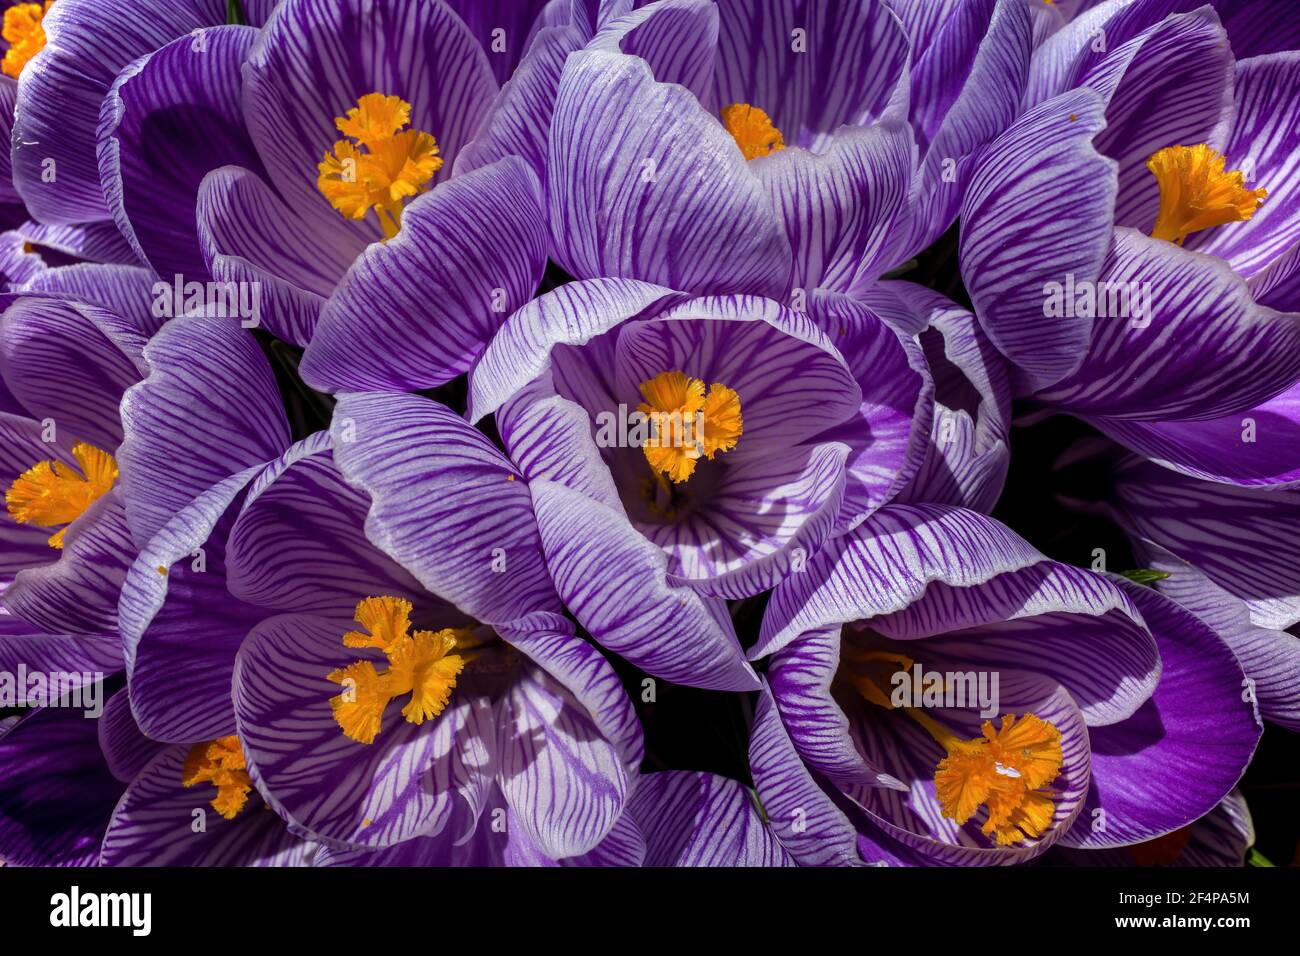 Best Early Spring Crocus Royalty-Free Images, Stock Photos